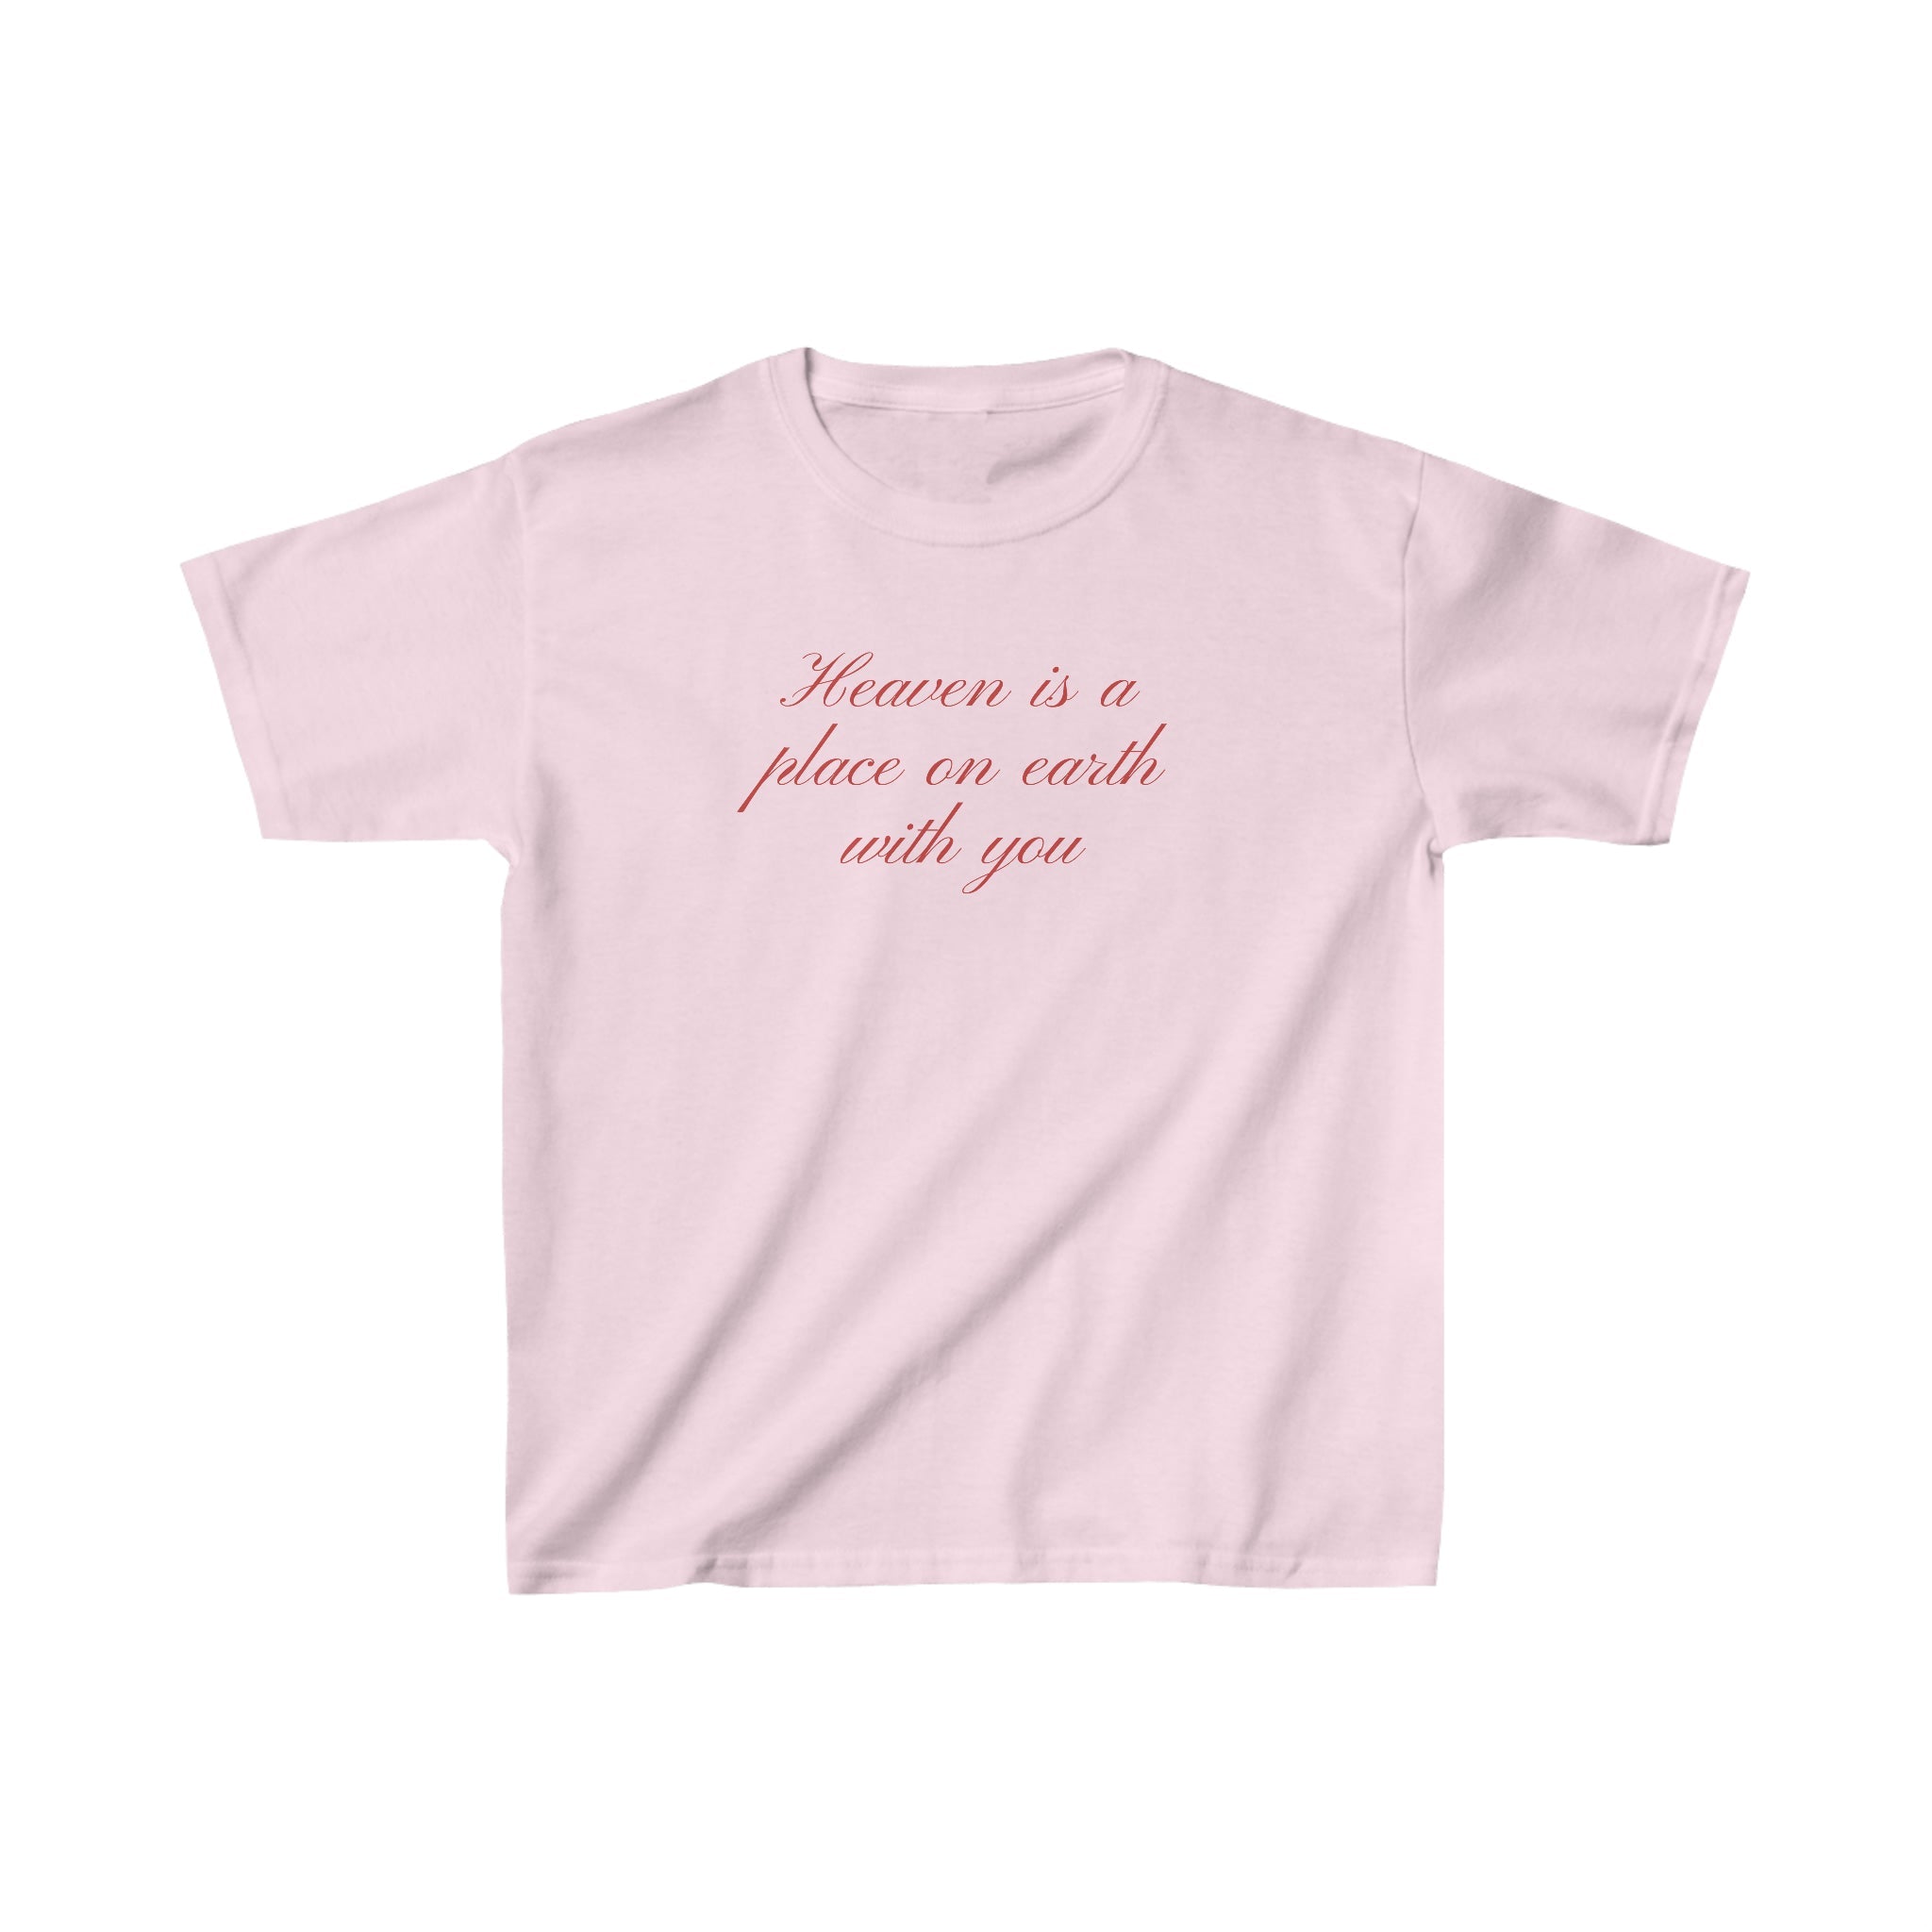 'Heaven is a place on earth with you' baby tee - In Print We Trust